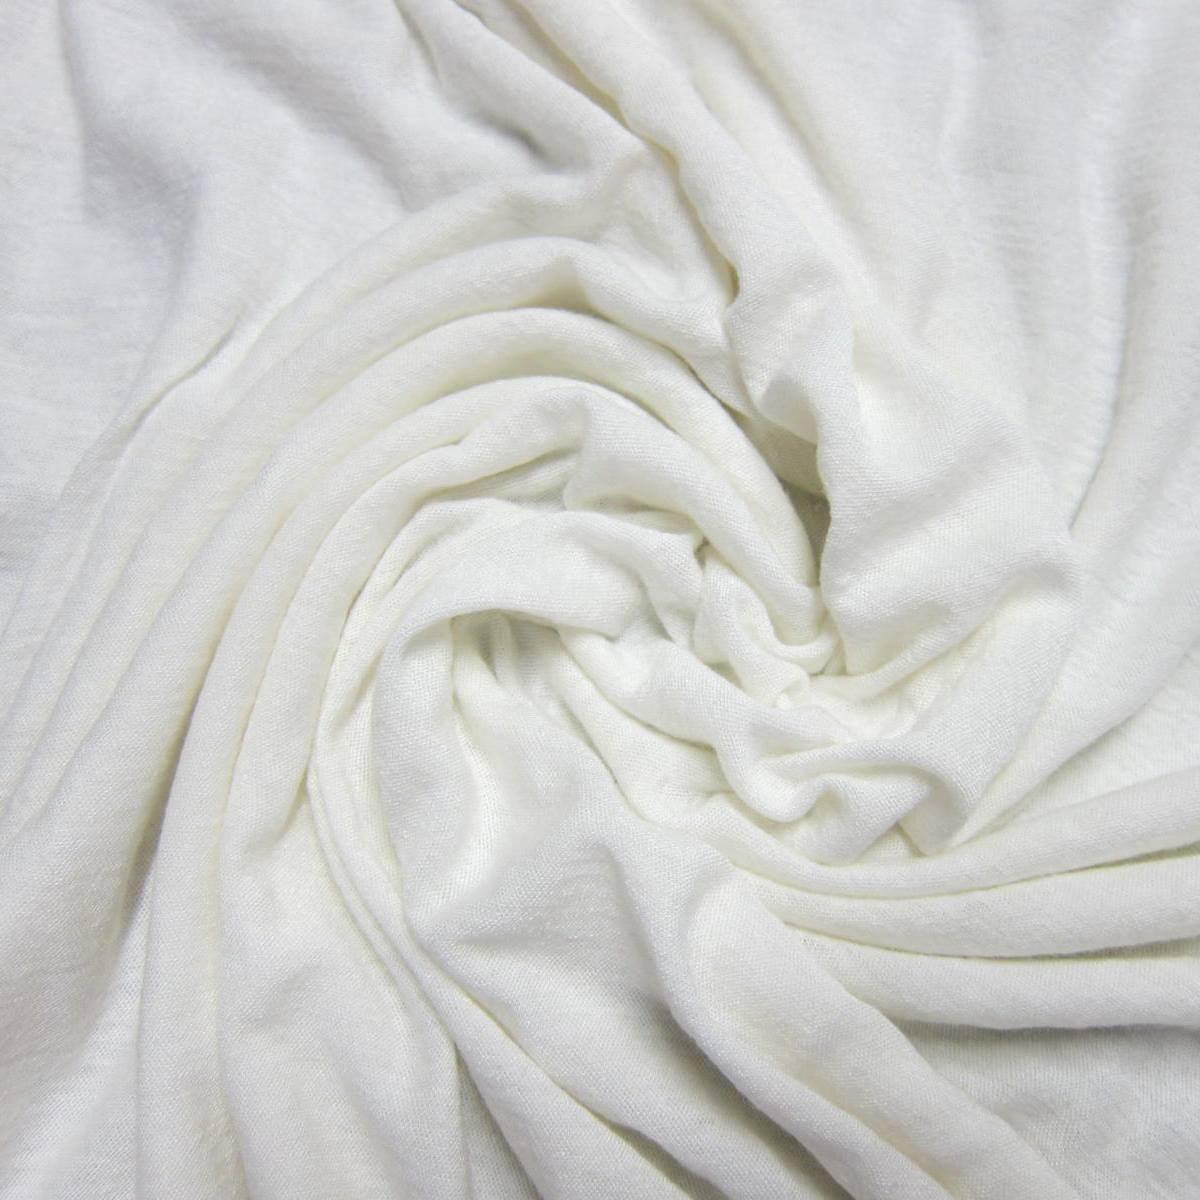 Natural Organic Cotton Sherpa Fabric - 400 GSM - Knit in the USA